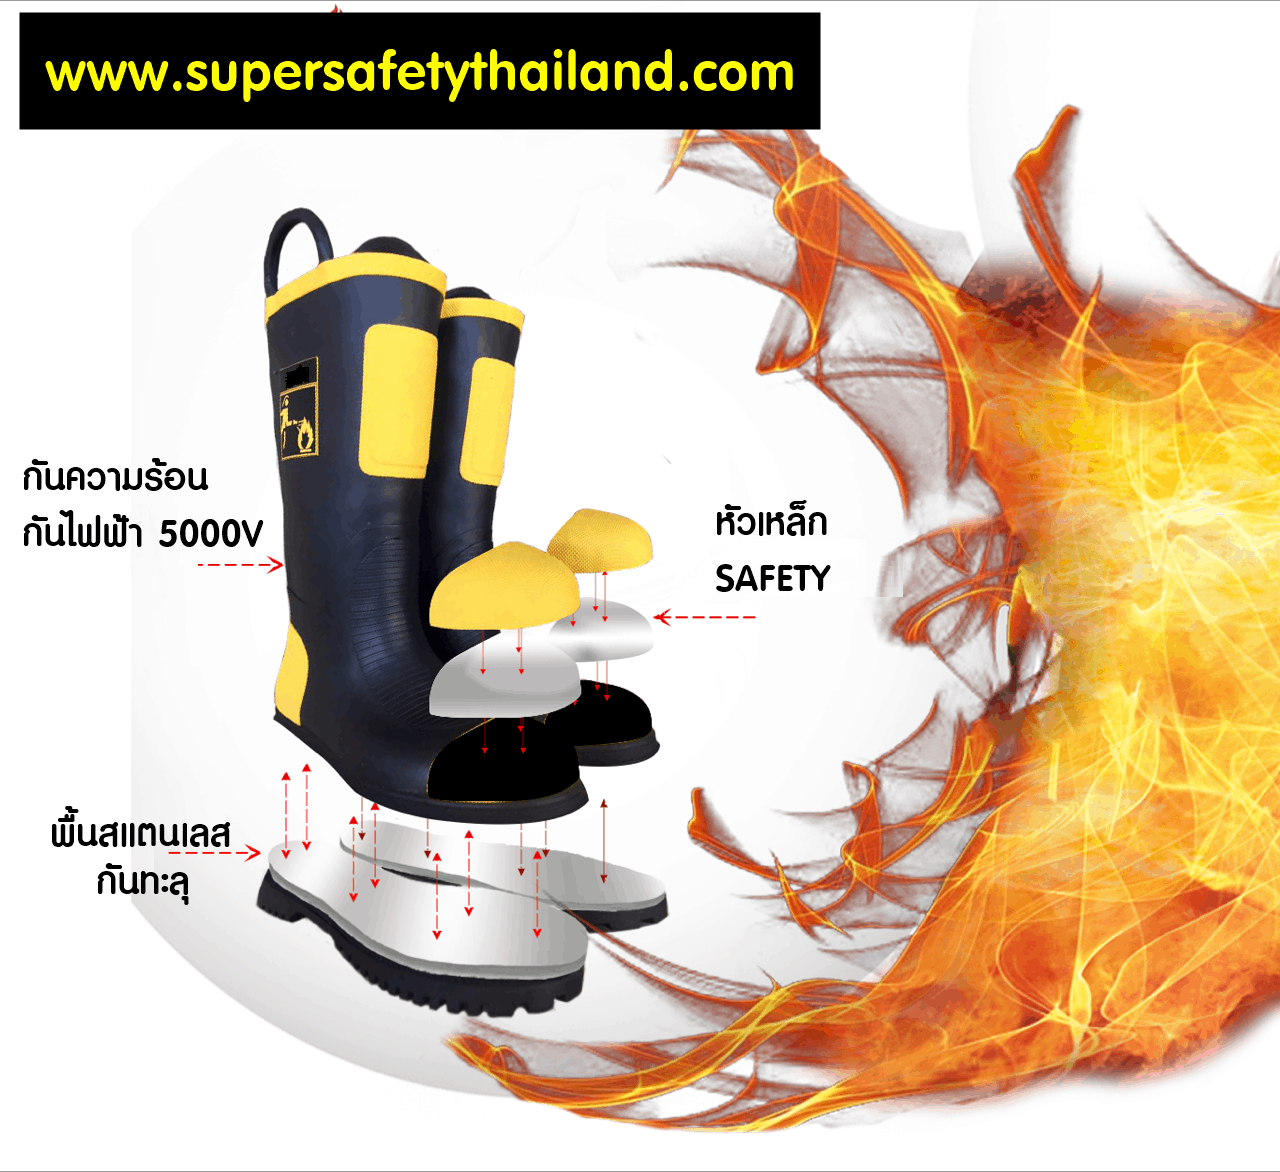 http://www.supersafetythailand.com/wp-content/uploads/2017/11/%E0%B8%A3%E0%B8%AD%E0%B8%87%E0%B9%80%E0%B8%97%E0%B9%89%E0%B8%B2%E0%B8%81%E0%B8%B1%E0%B8%99%E0%B9%84%E0%B8%9F%E0%B8%9F%E0%B9%89%E0%B8%B2%E0%B9%81%E0%B8%A3%E0%B8%87%E0%B8%AA%E0%B8%B9%E0%B8%87.png